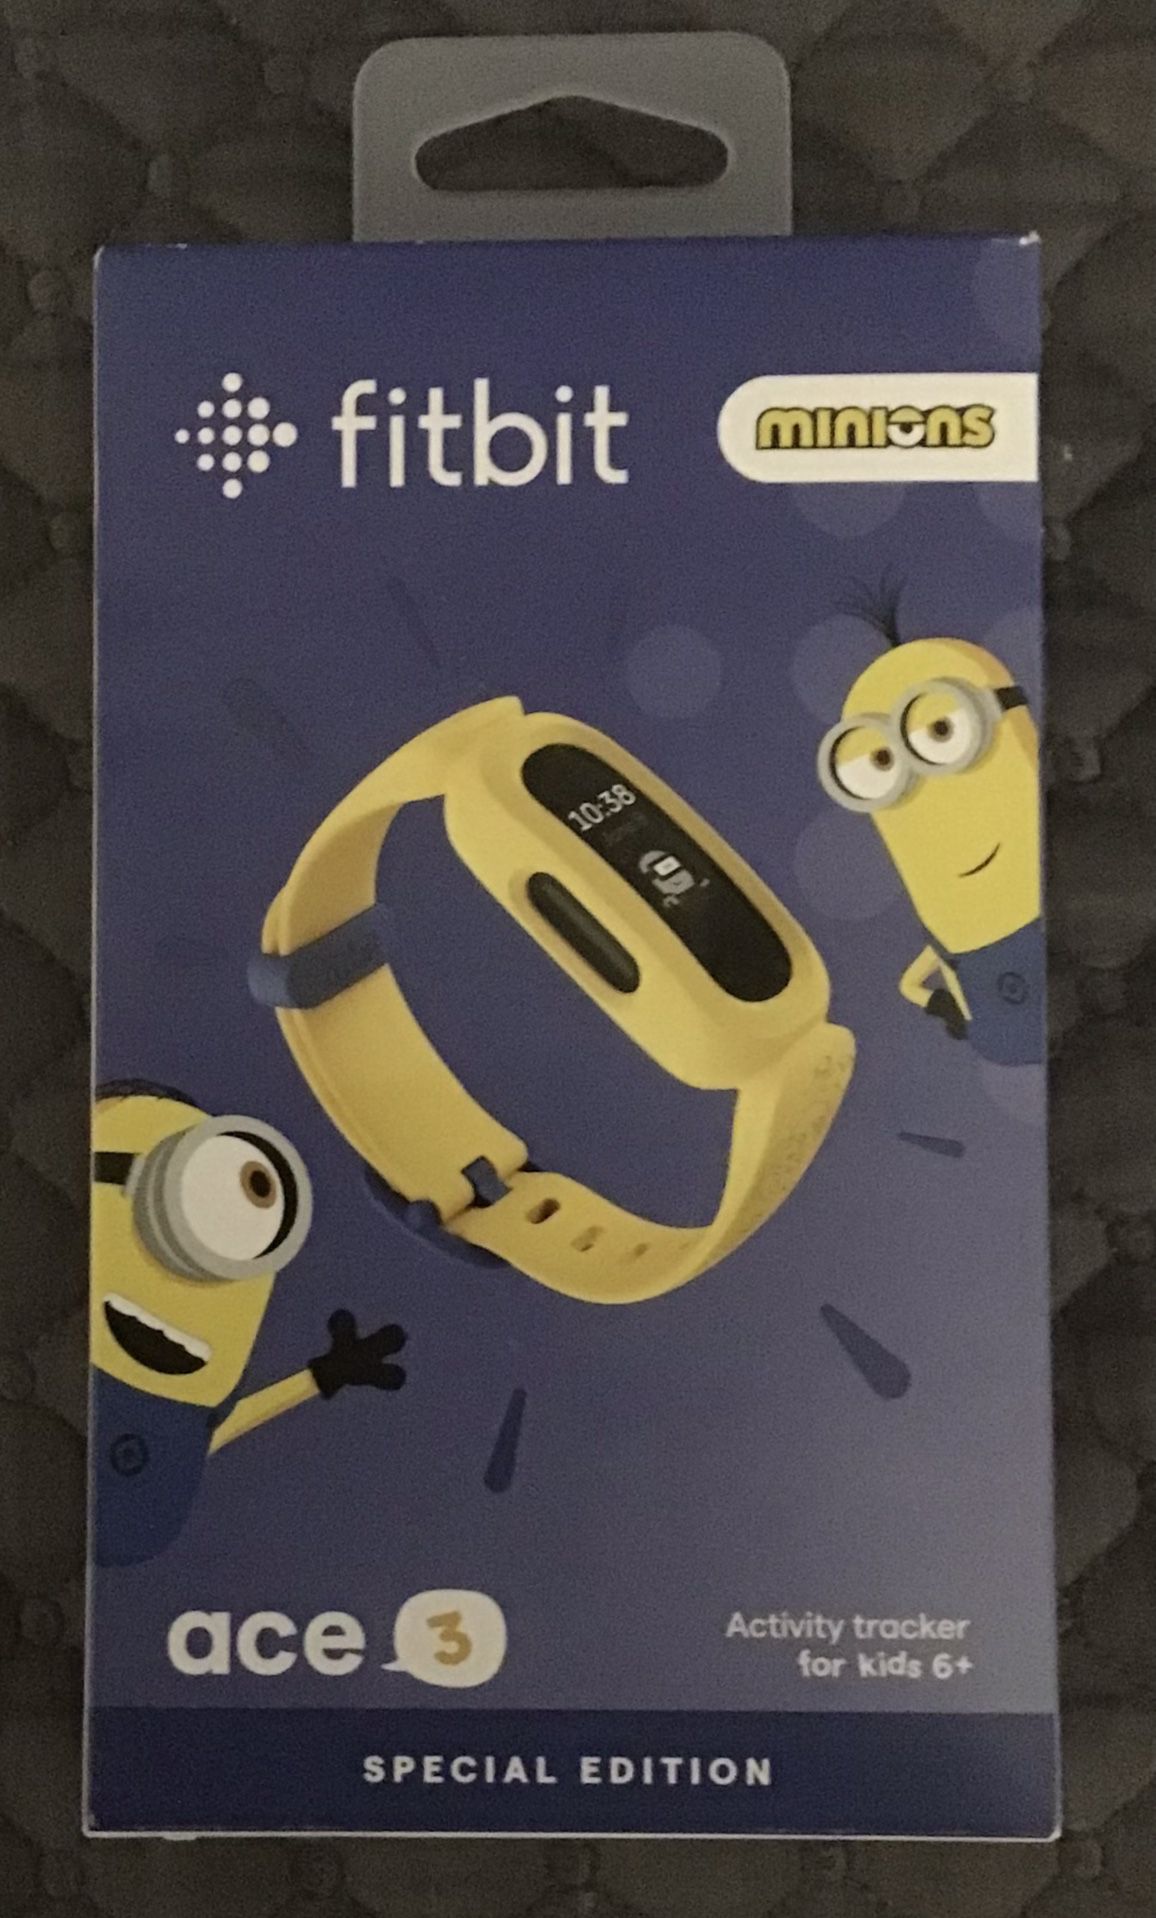 Fitbit Ace 3 Activity-Tracker for Kids 6+, Minions Special Edition NEW SEALED